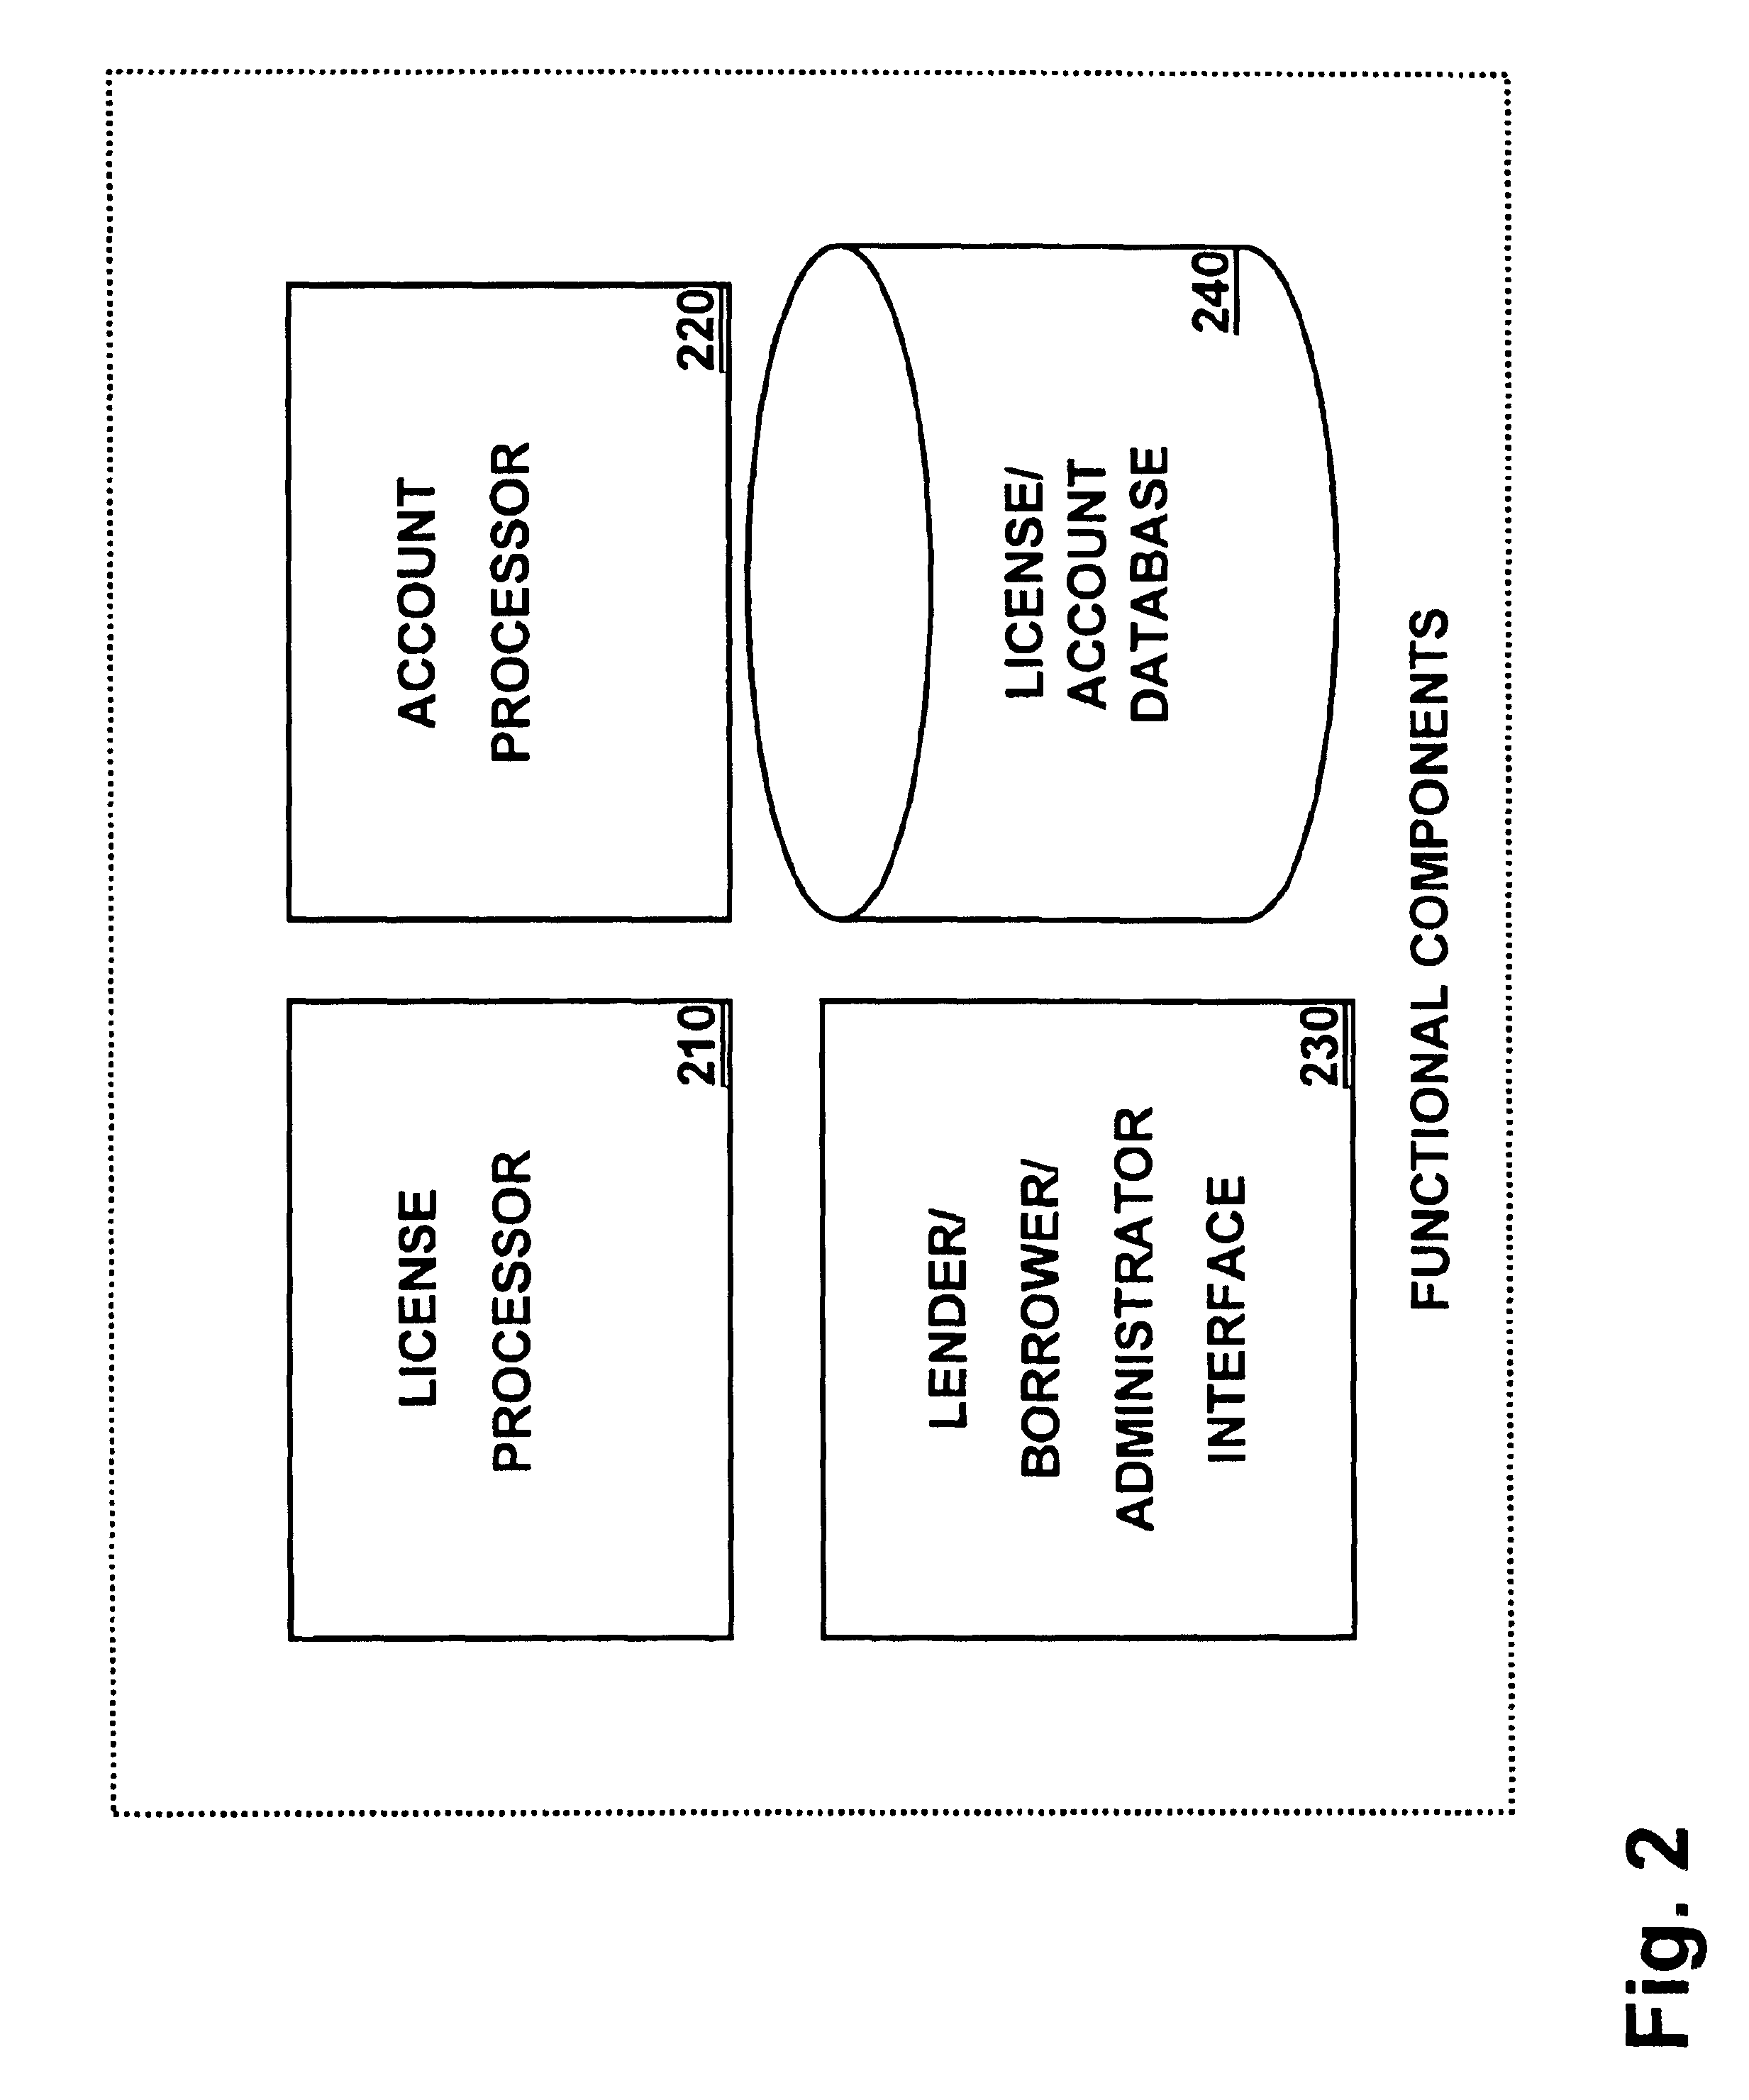 Electronic asset lending library method and apparatus